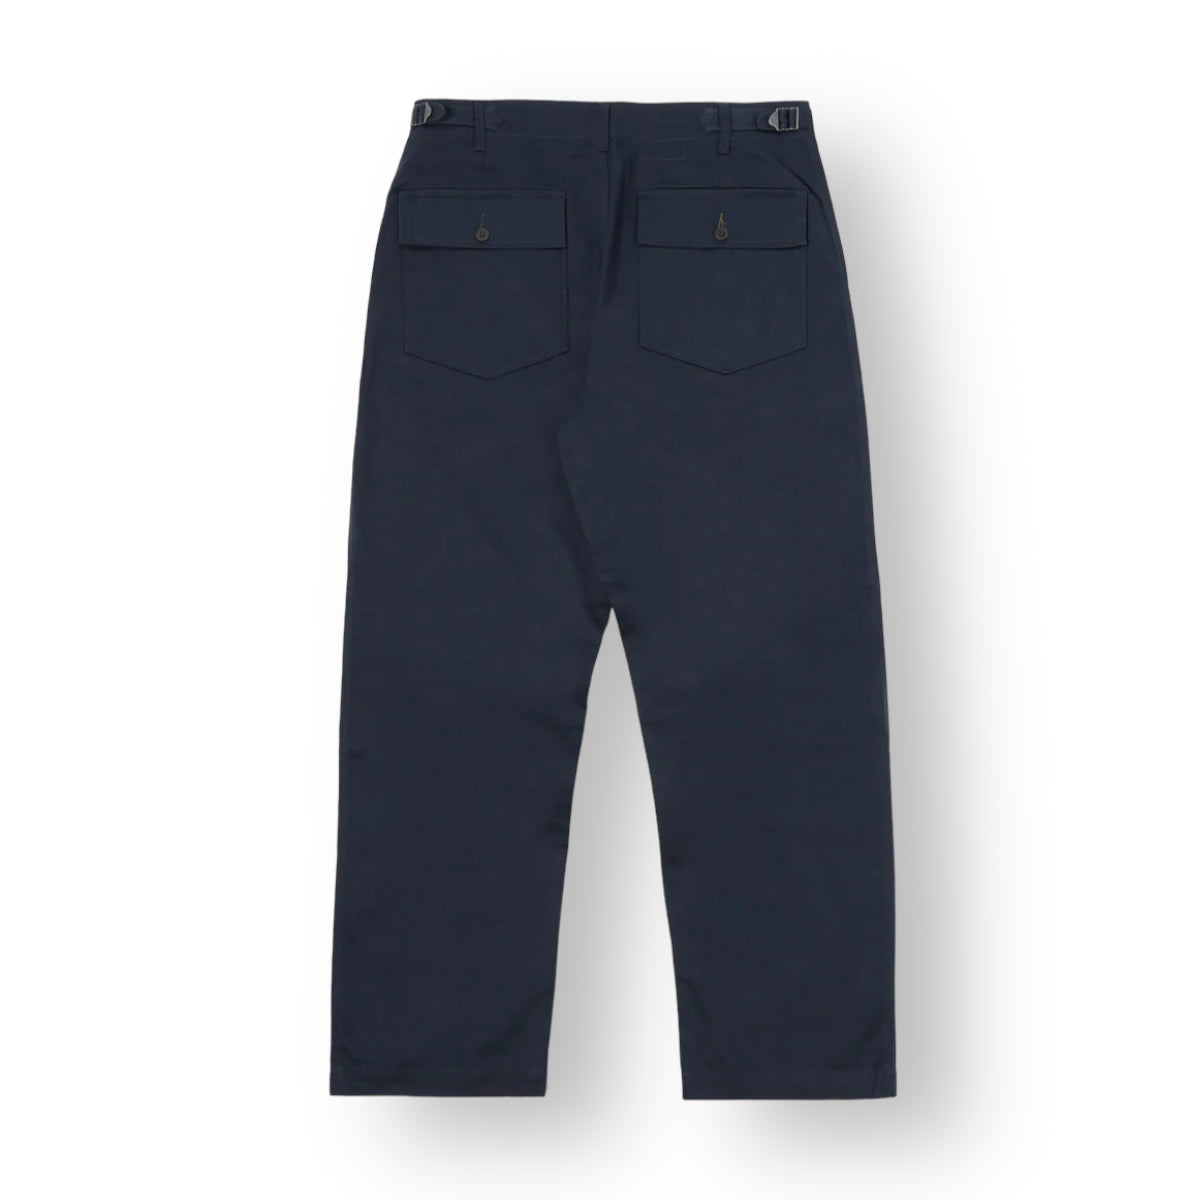 Universal Works Fatigue Pant twill navy 00132